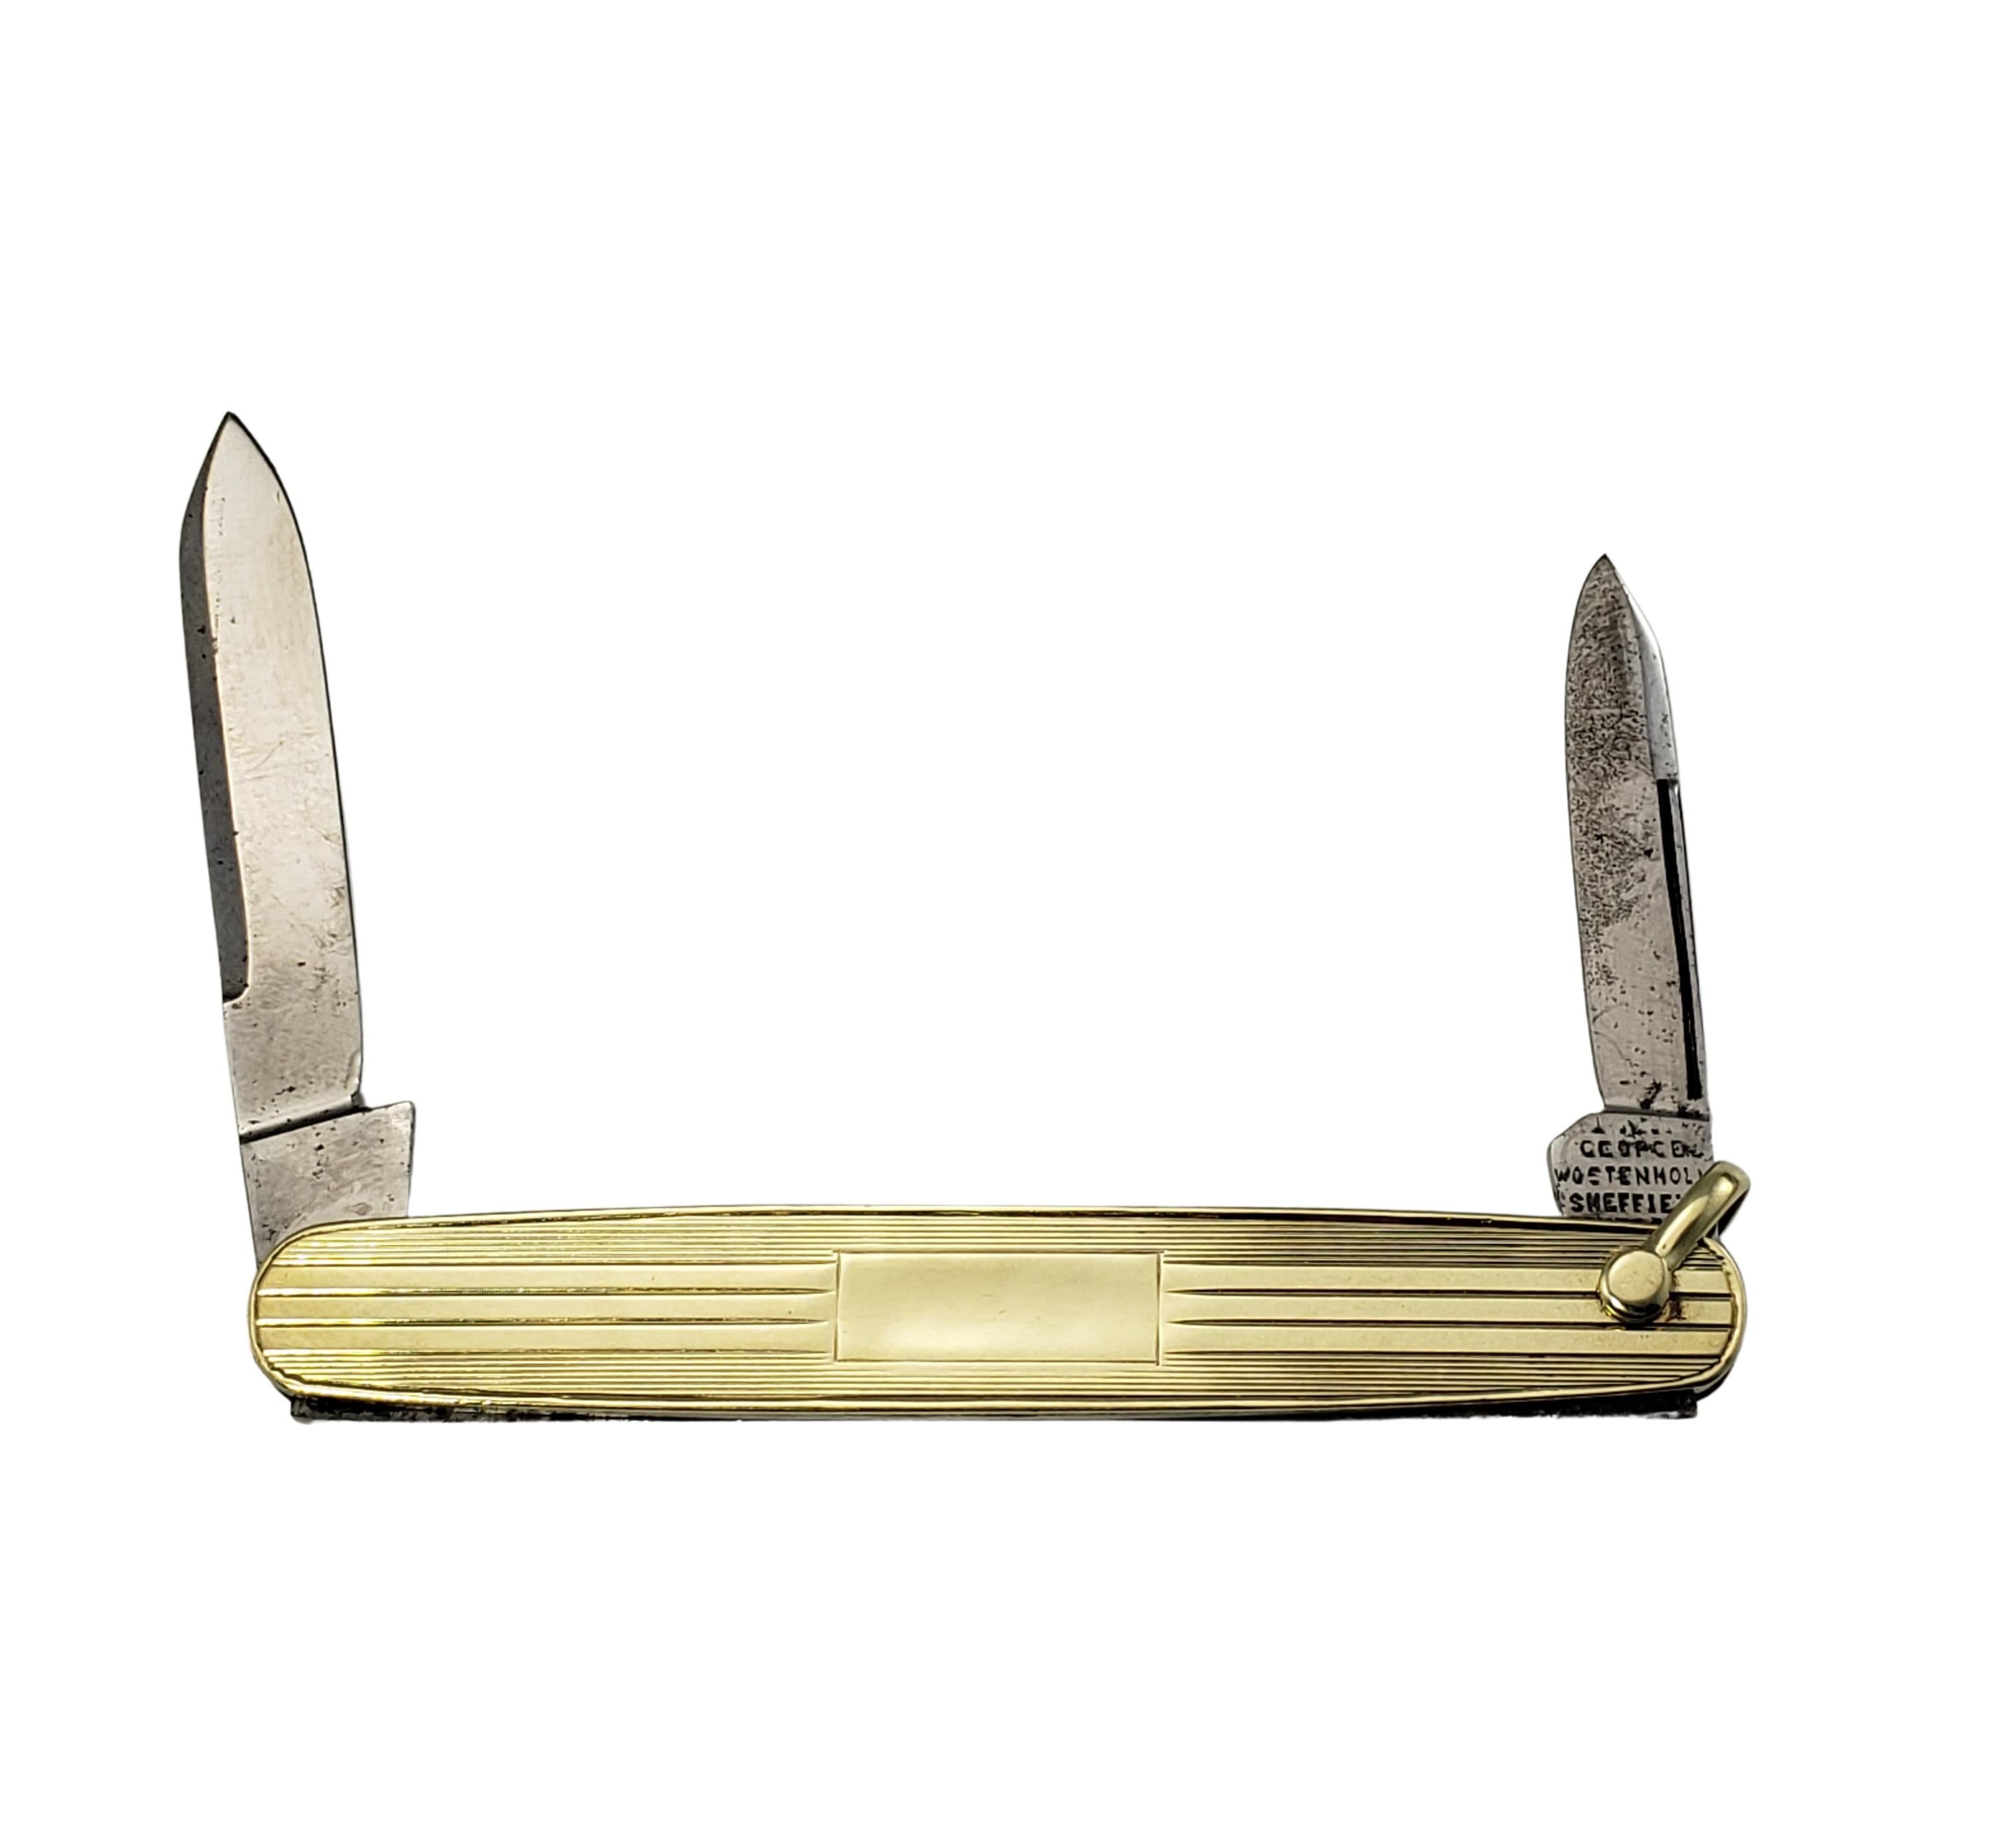 Women's or Men's George Wostenholm England 14K Yellow Gold & Stainless Steel Pocket Knife